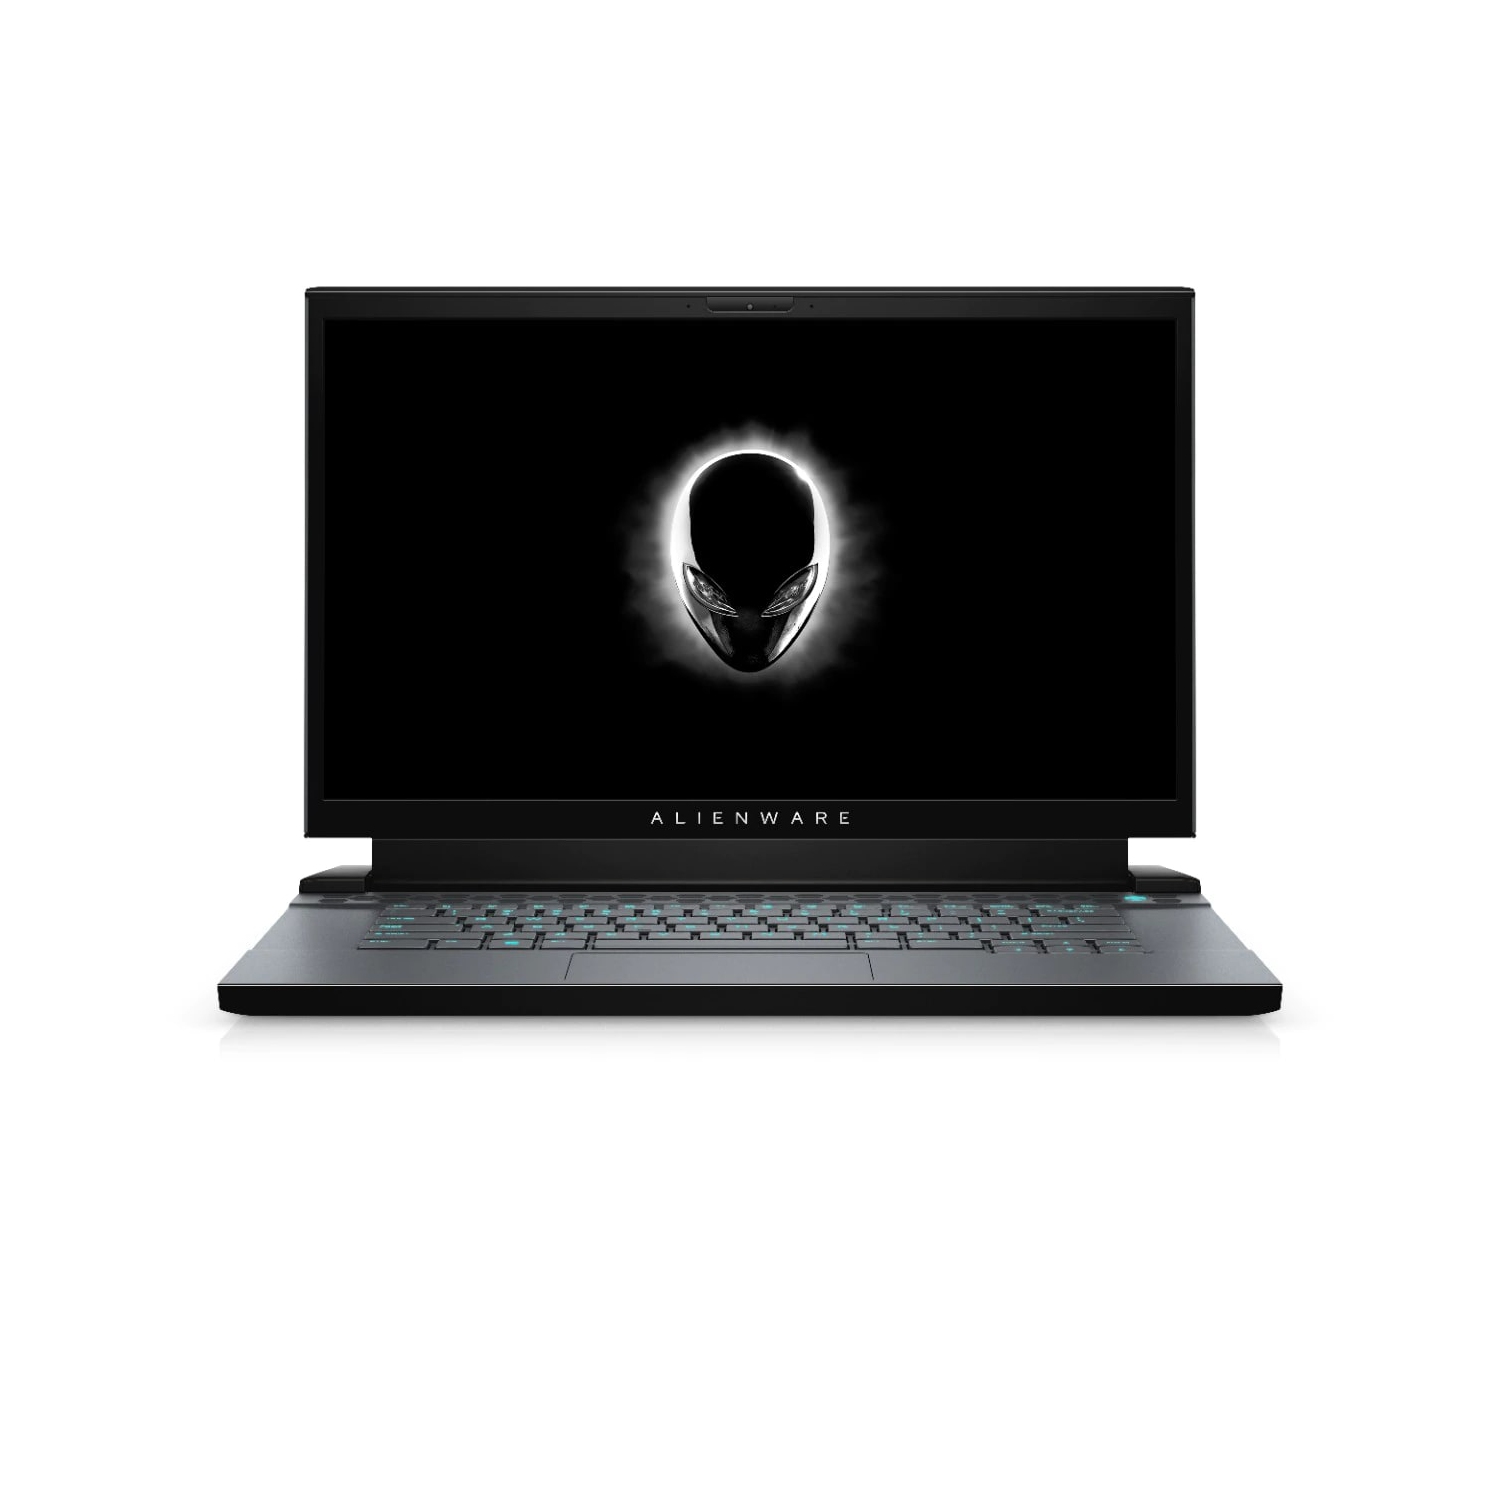 Refurbished (Excellent) - Dell Alienware m15 R2 Gaming Laptop (2019) | 15.6" FHD | Core i7 - 512GB SSD - 16GB RAM - RTX 2060 | 6 Cores @ 4.5 GHz Certified Refurbished